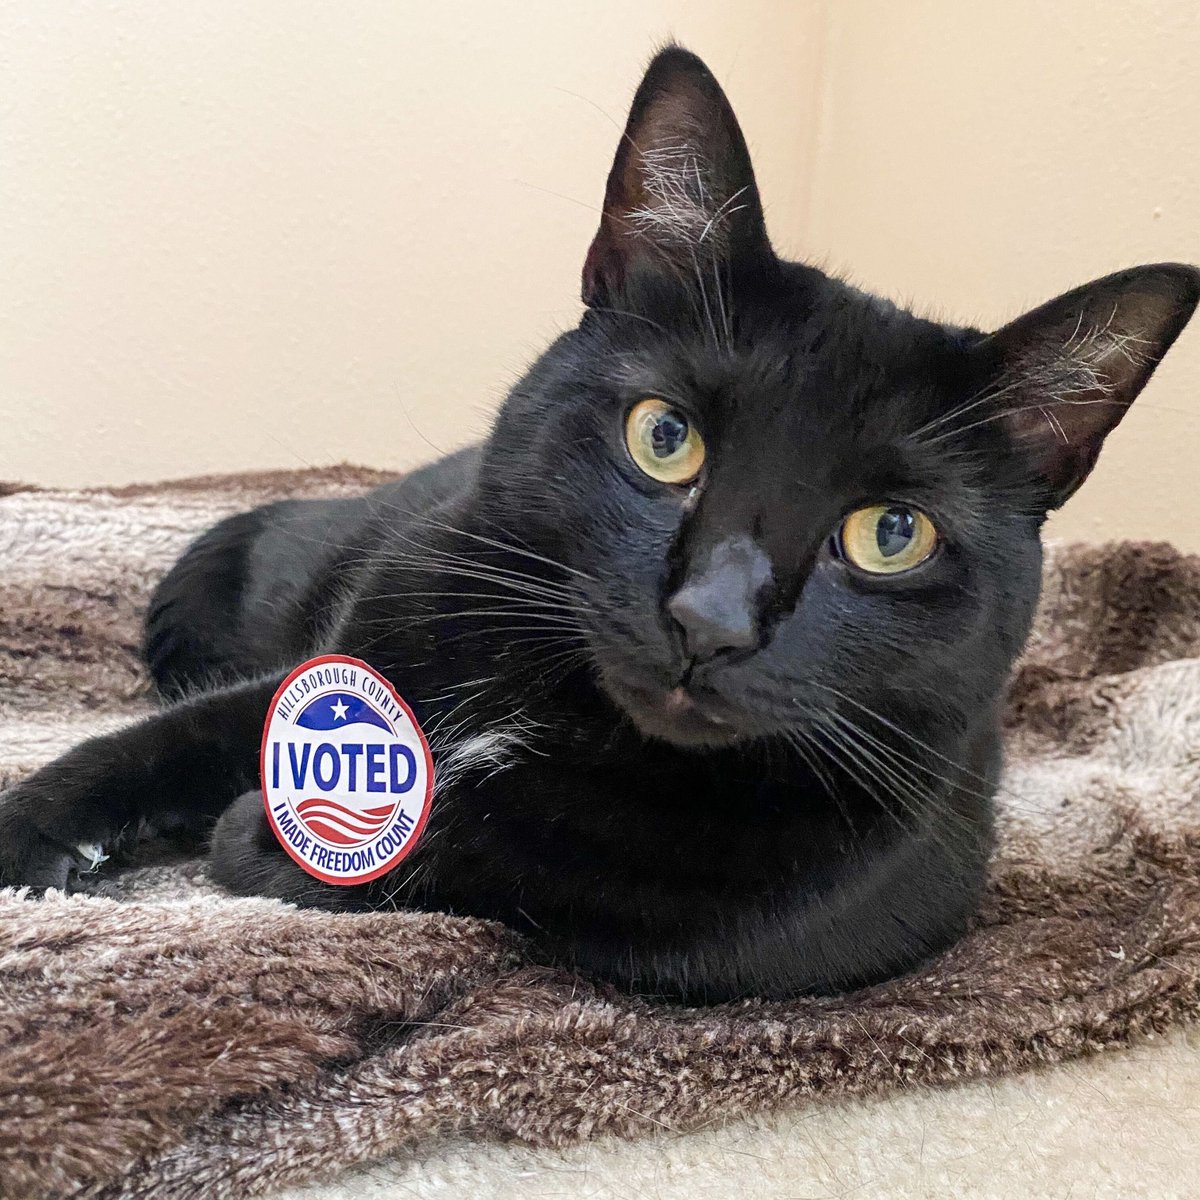 Meet  @TimesDan furiend, Abigail (2). She did not vote but loves the sticker.